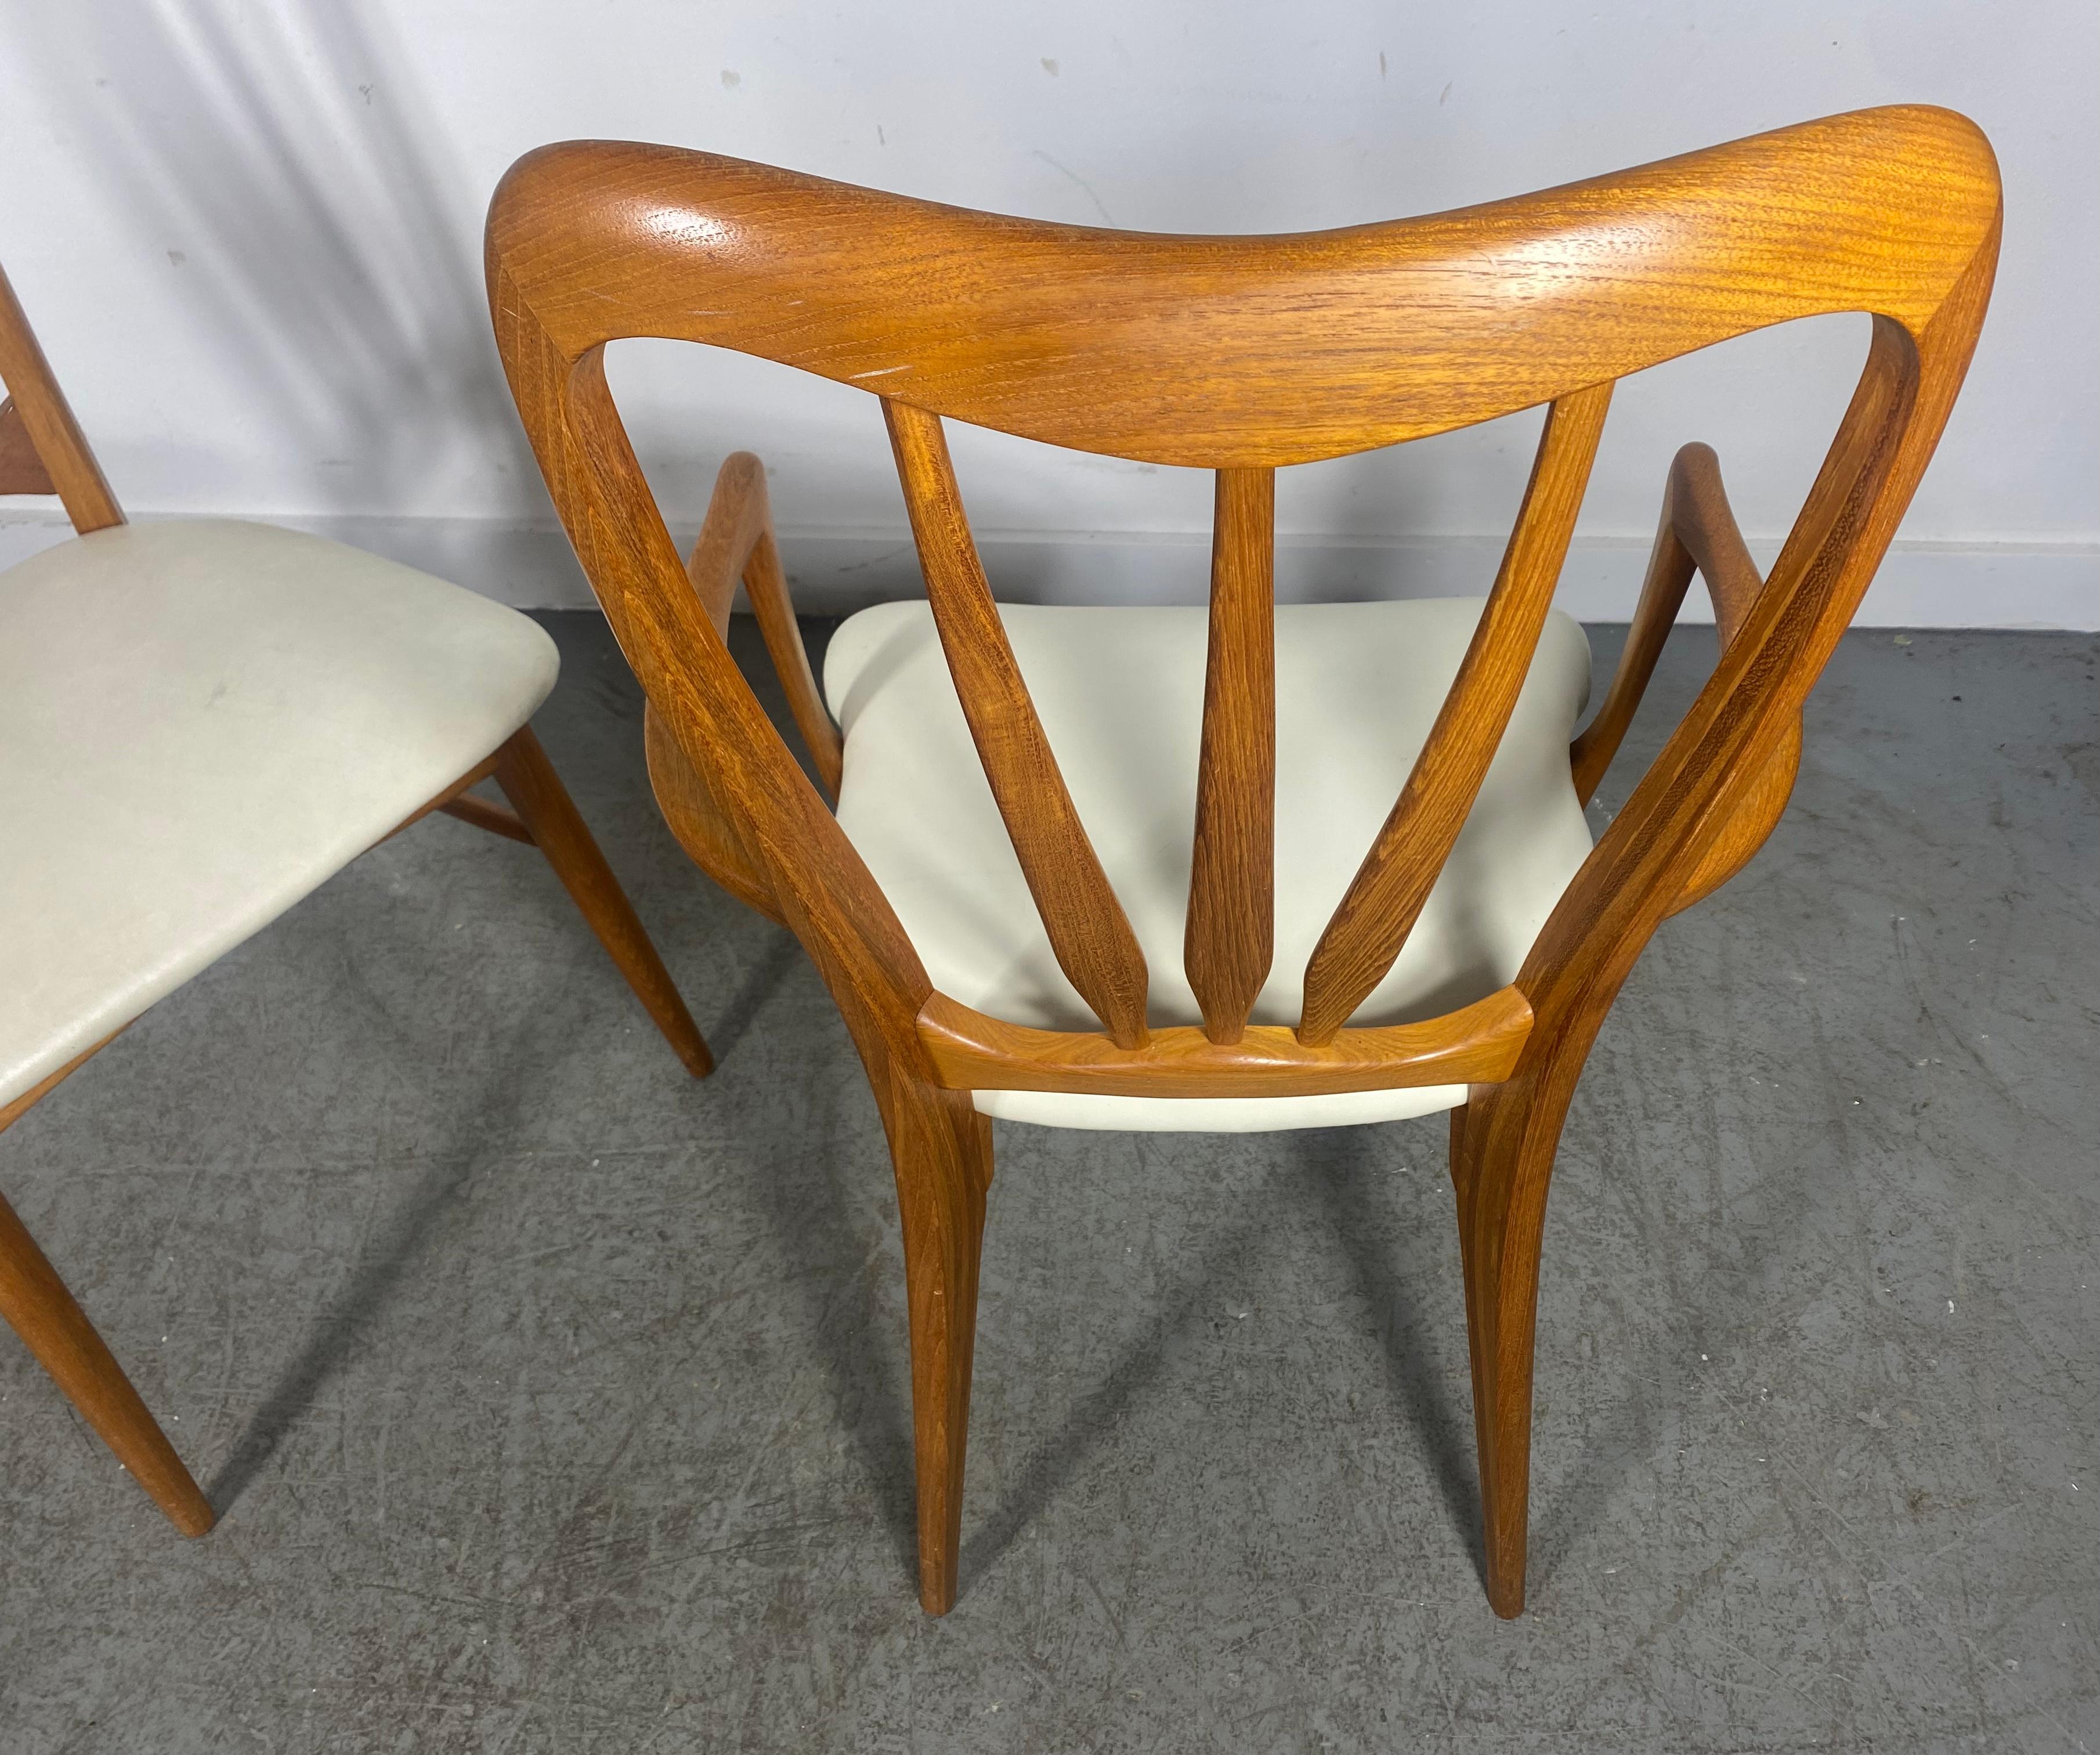 Set of Eight Dining Chairs by Niels Koefoed for Koefoeds Hornslet Denmark 1